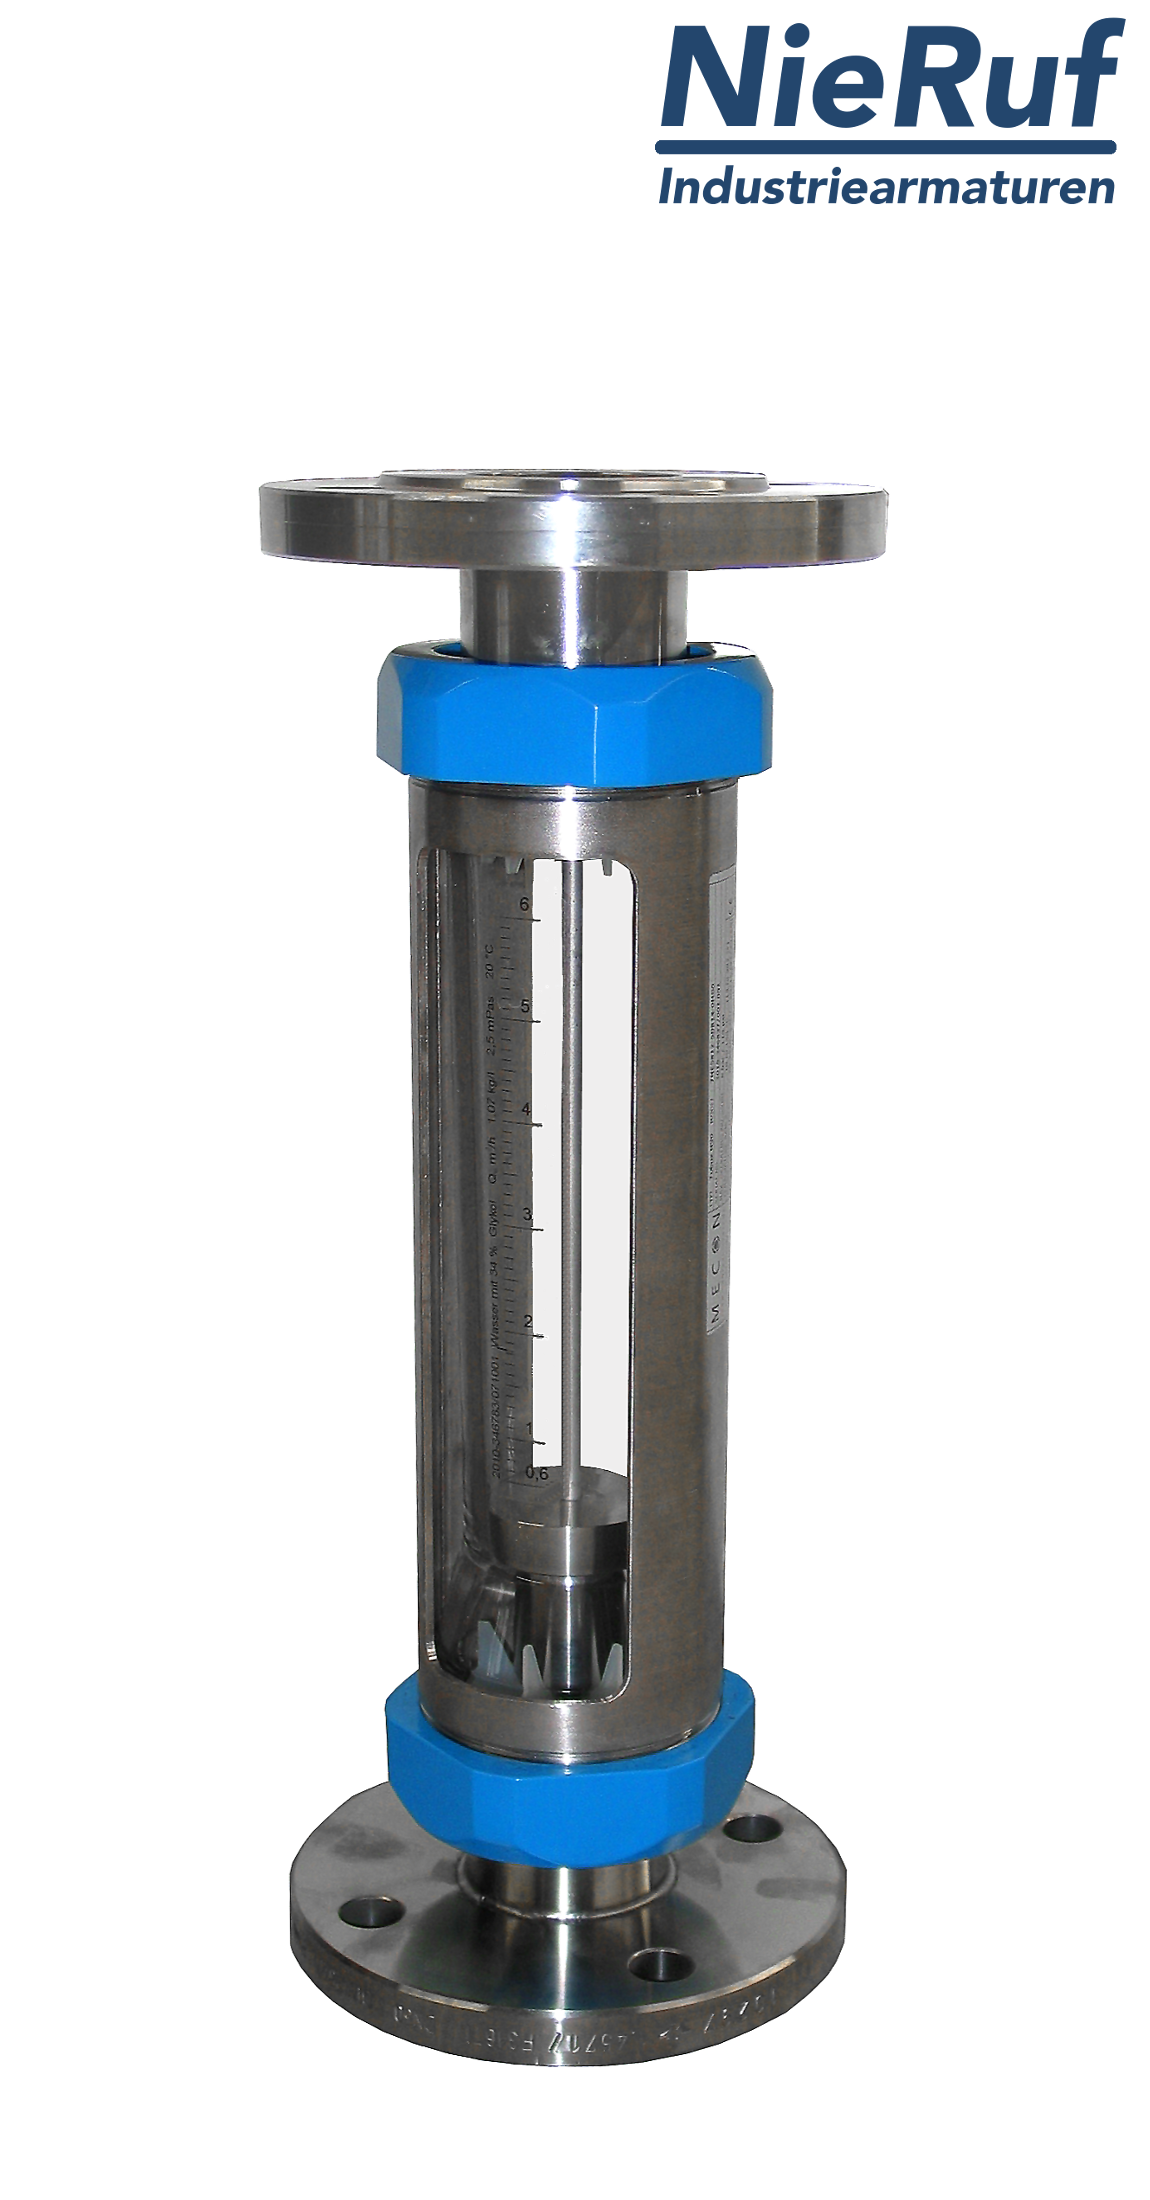 Variable area flowmeter stainless steel + borosilicate flange DN32 160.0 - 1600 l/h water FKM